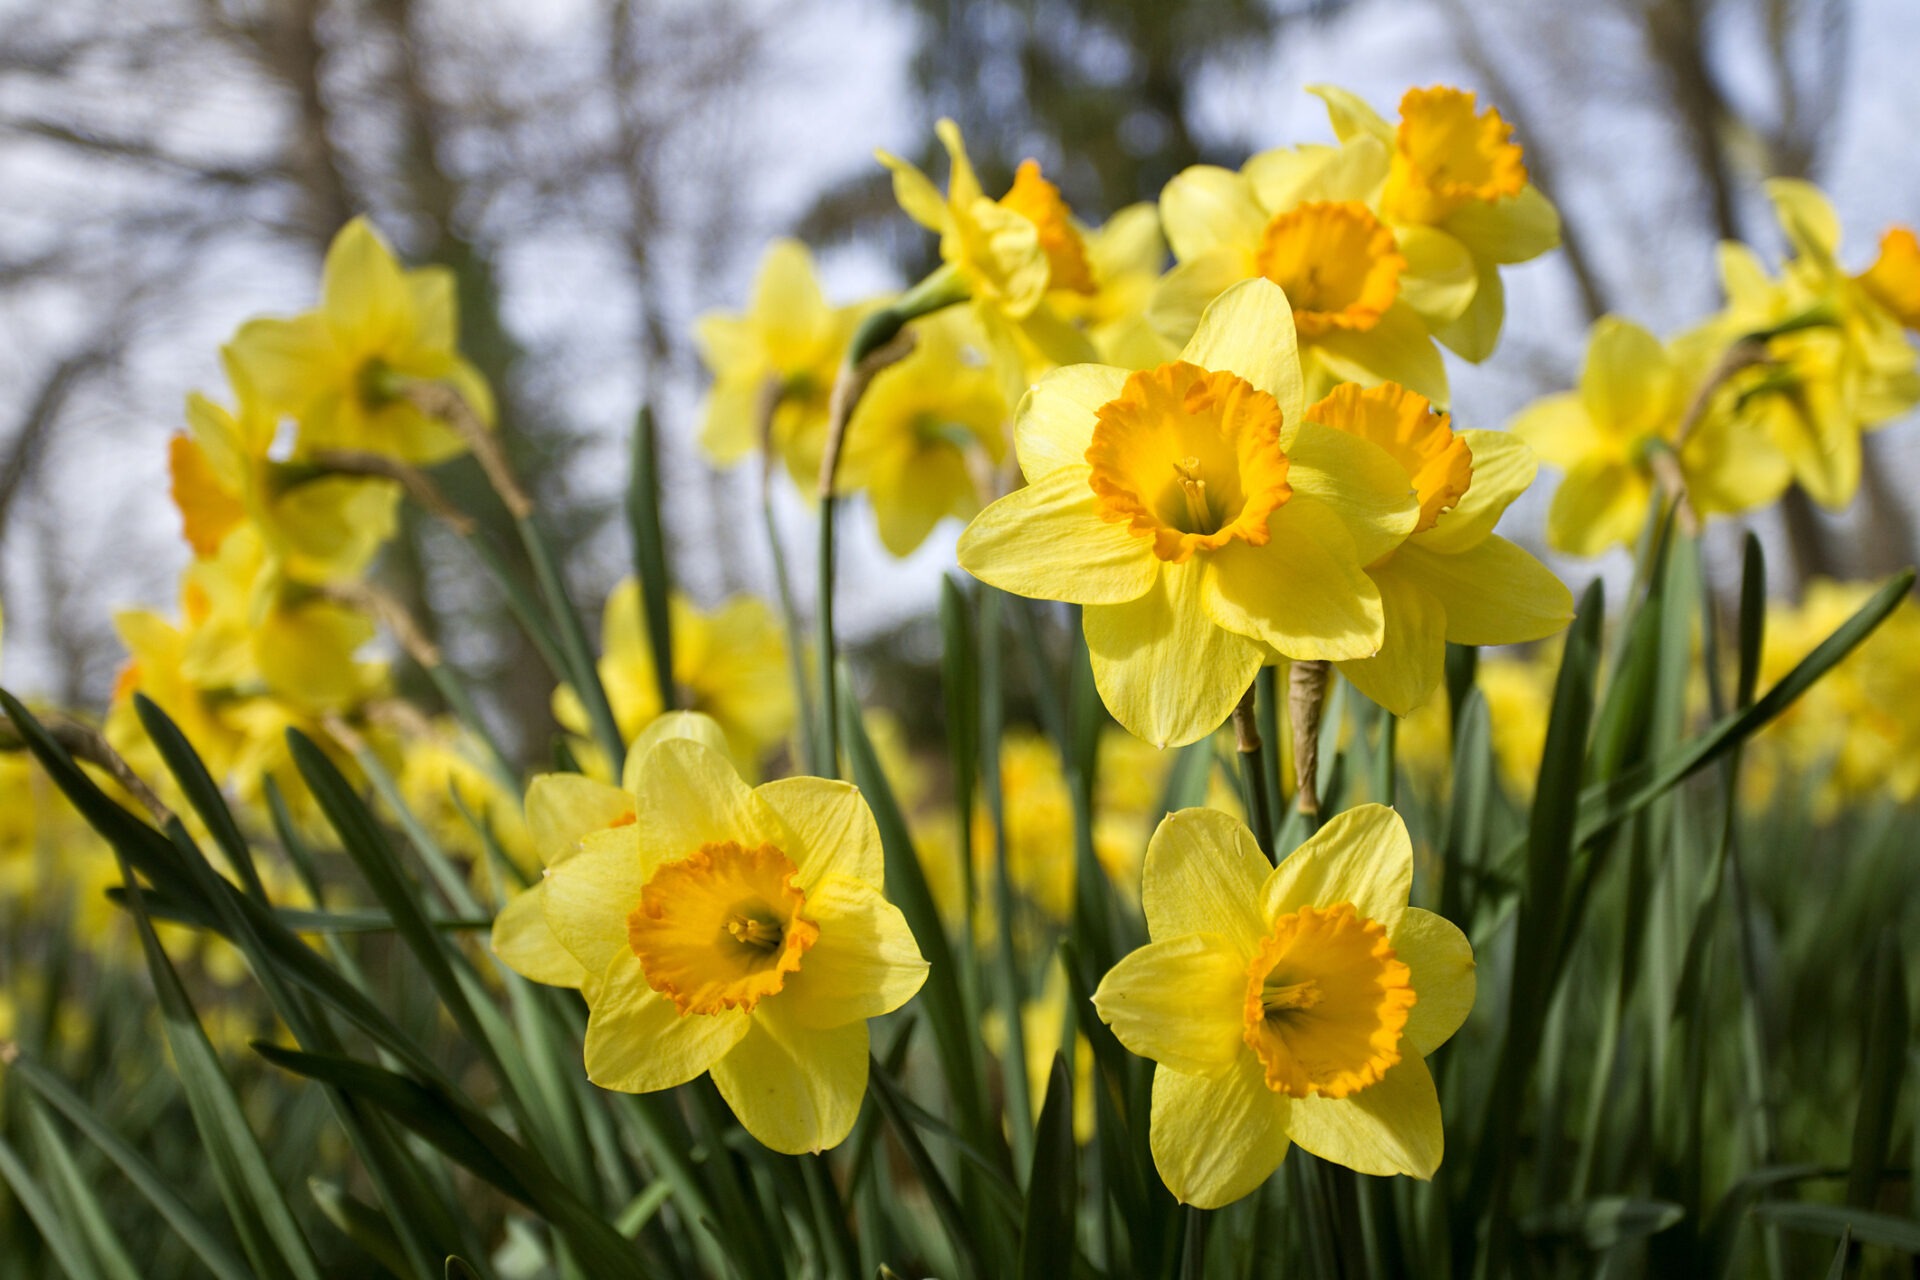 This image shows a vibrant group of yellow daffodils with orange centers blooming against a soft-focus background of trees and sky.